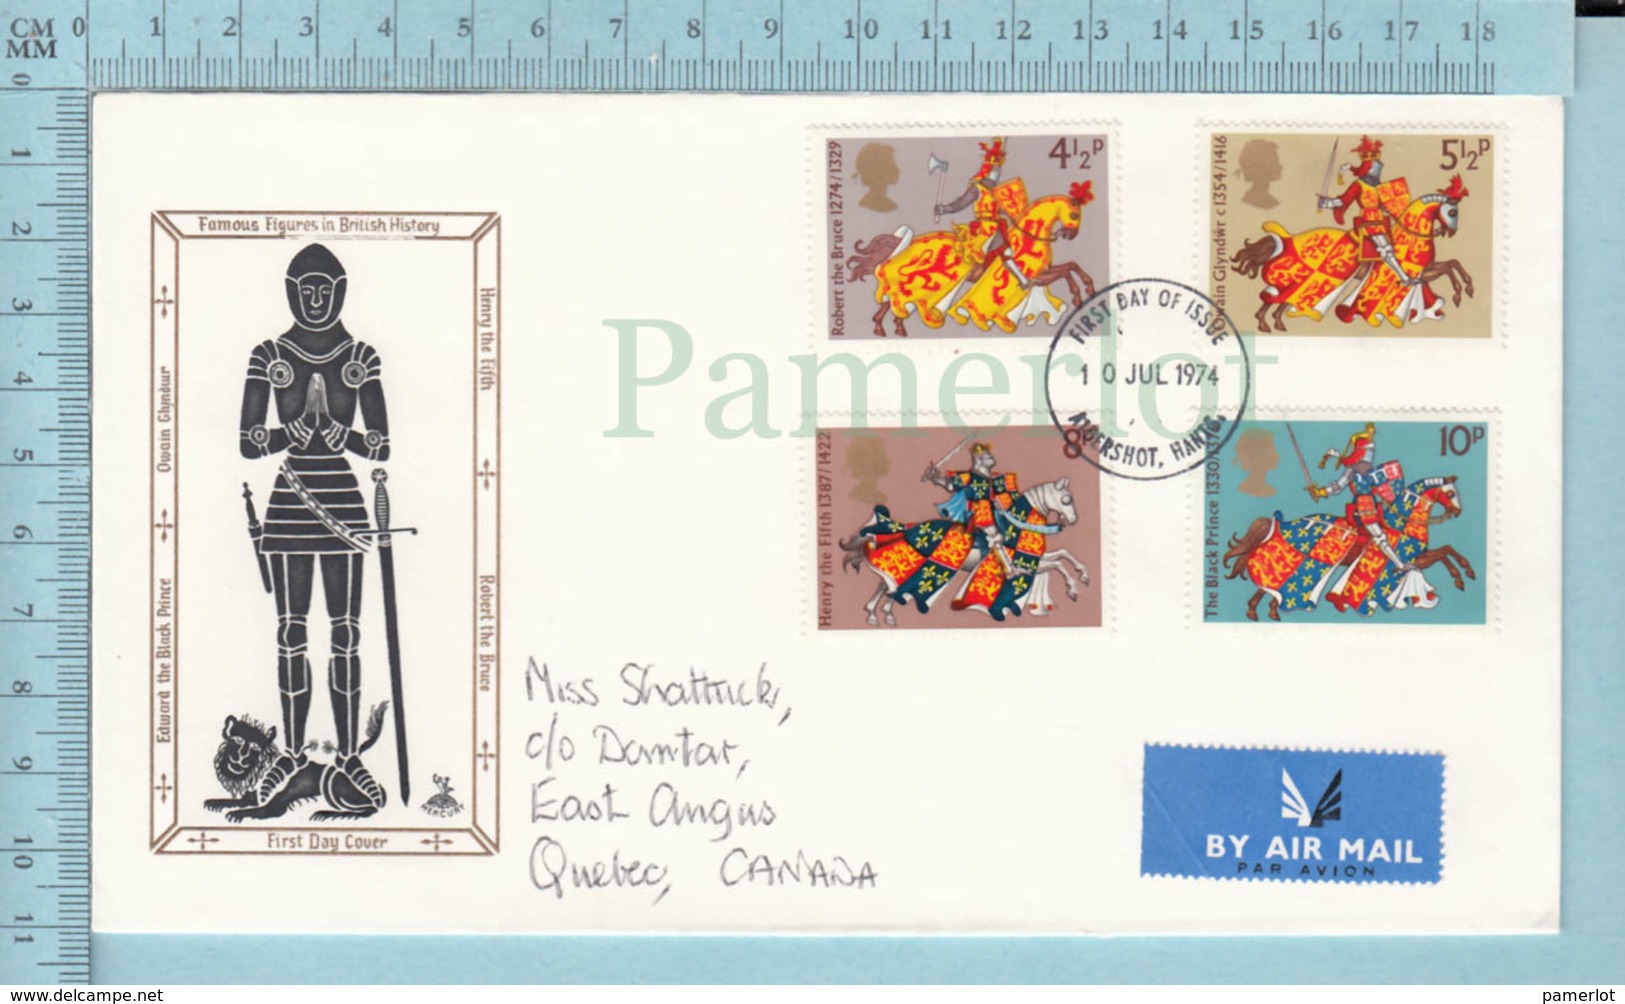 GB - FDC PPJ, 1974 , 4 Stamps, Flame: Famus Figures In British History, Send To Canada Viai Air - Militaria